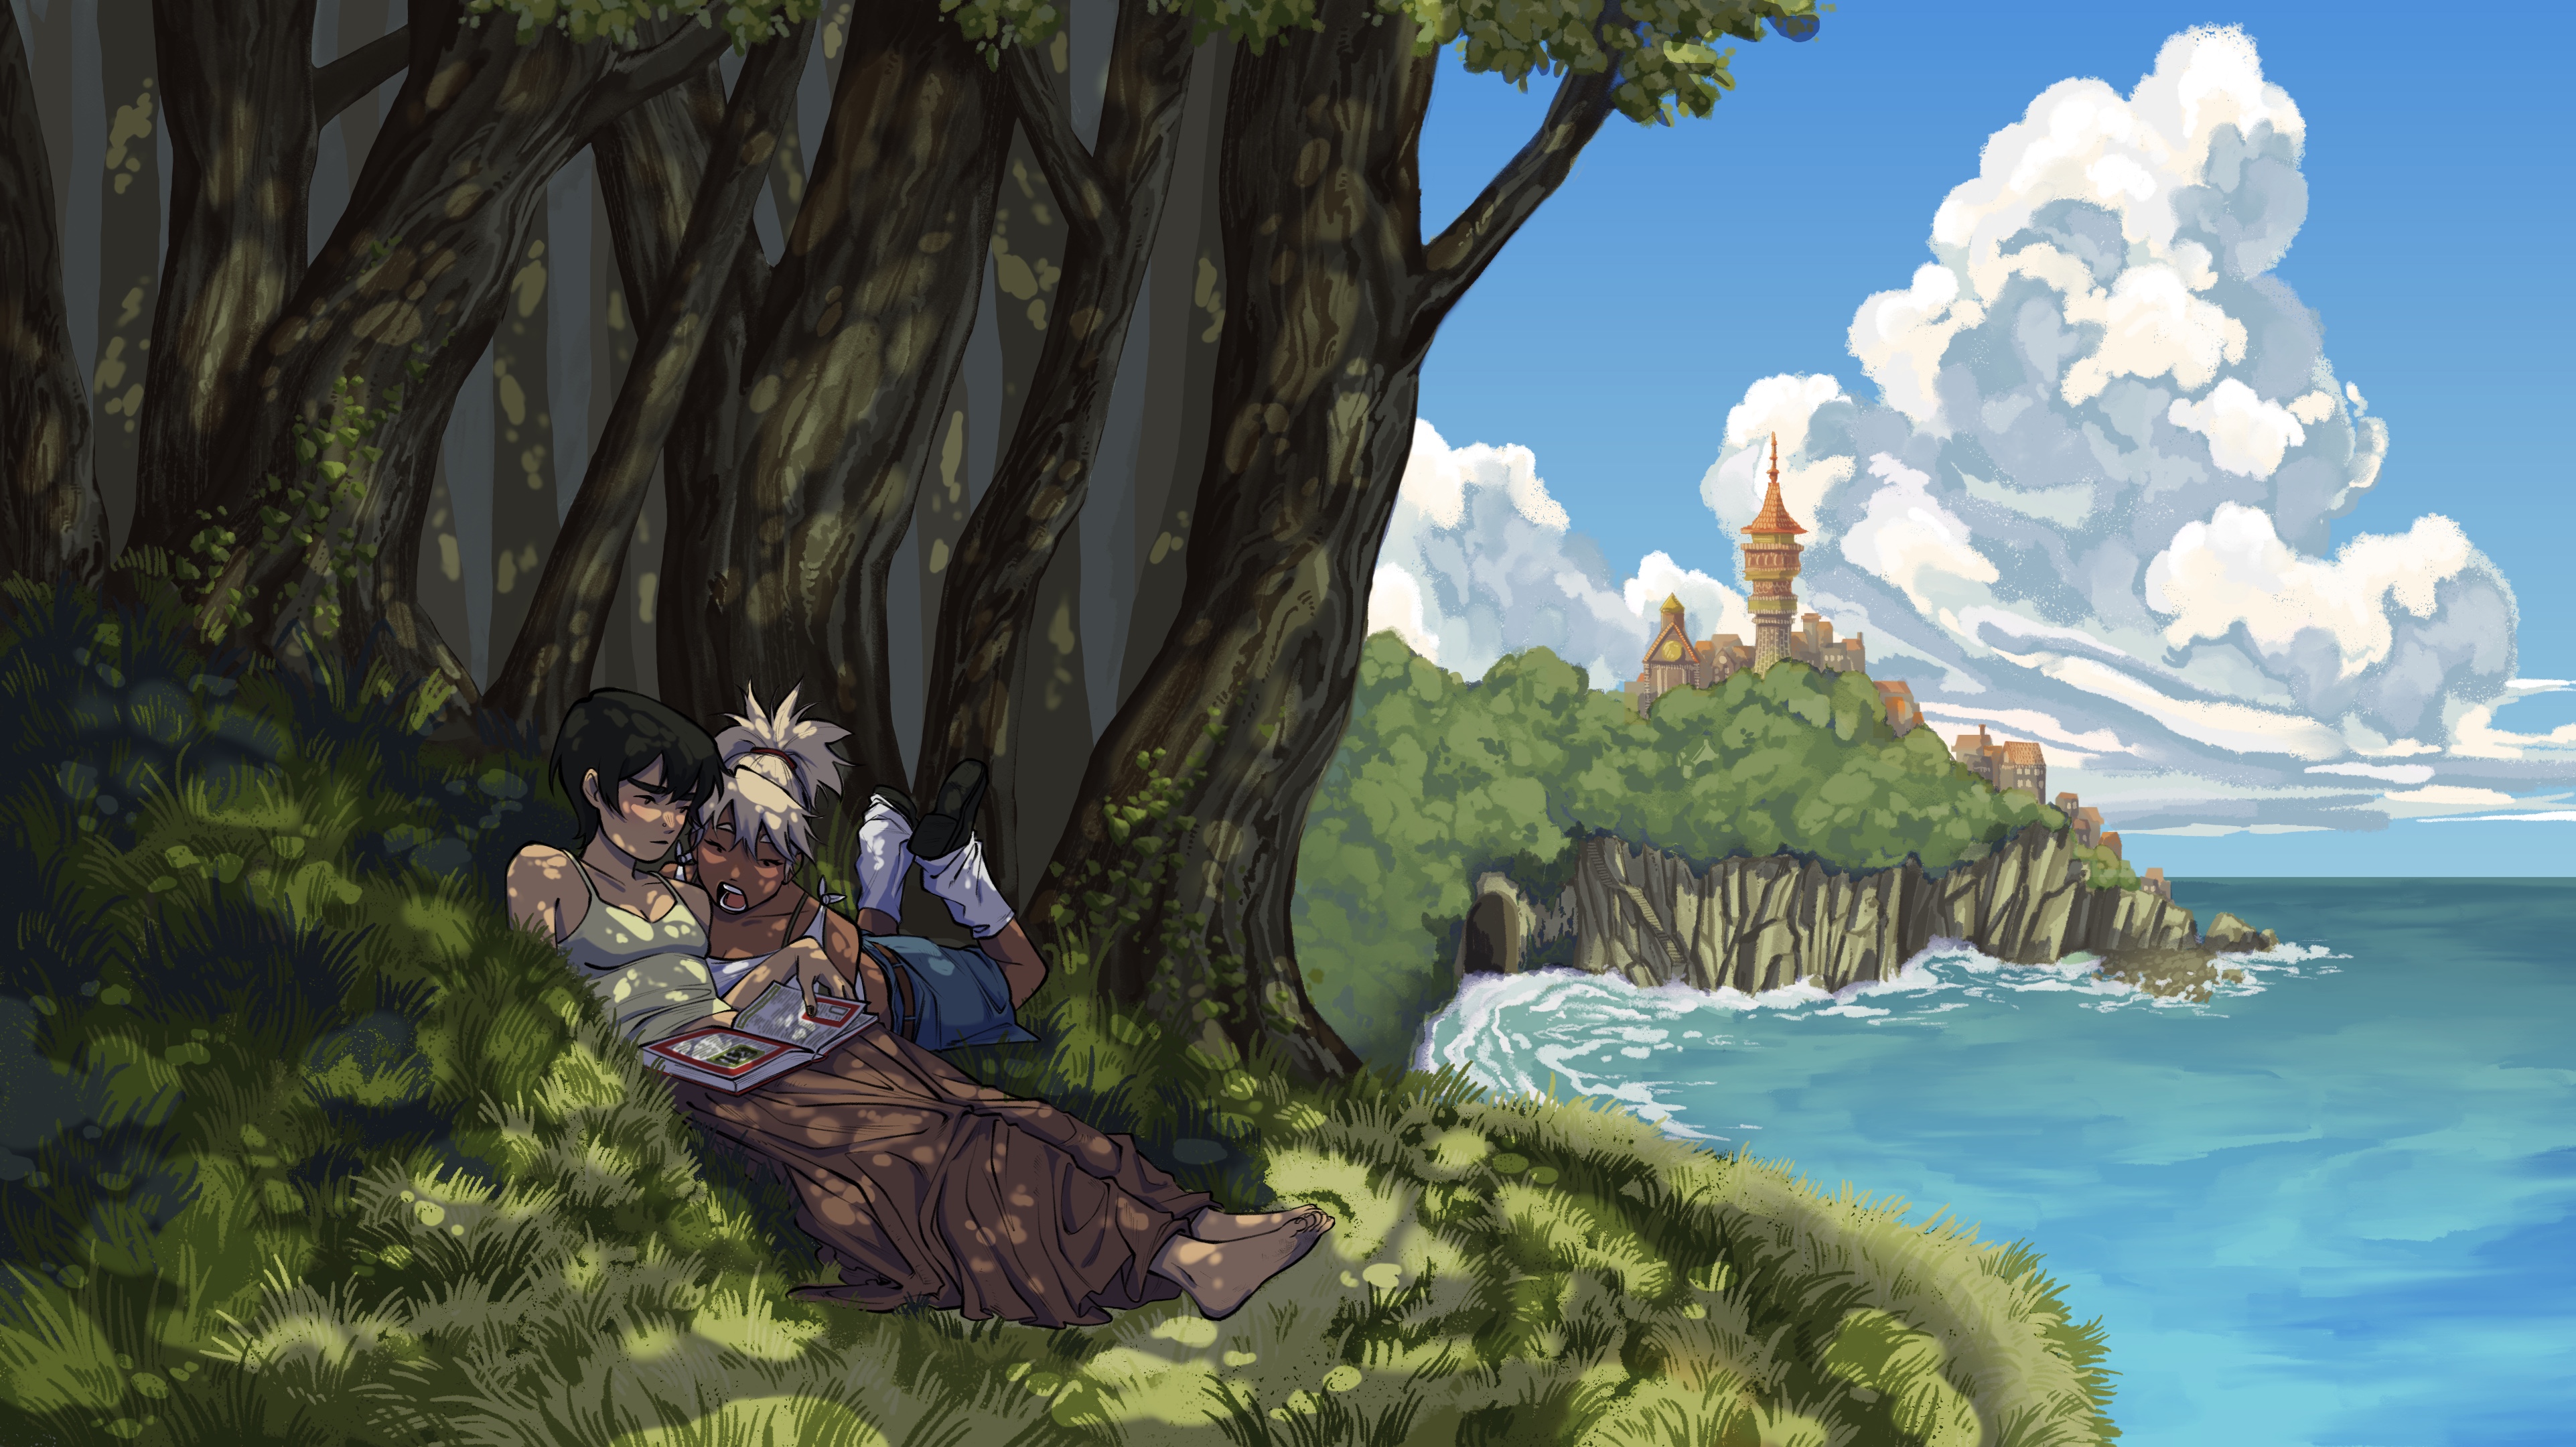 Illustration of two girls sitting under trees next to sea with castle in background